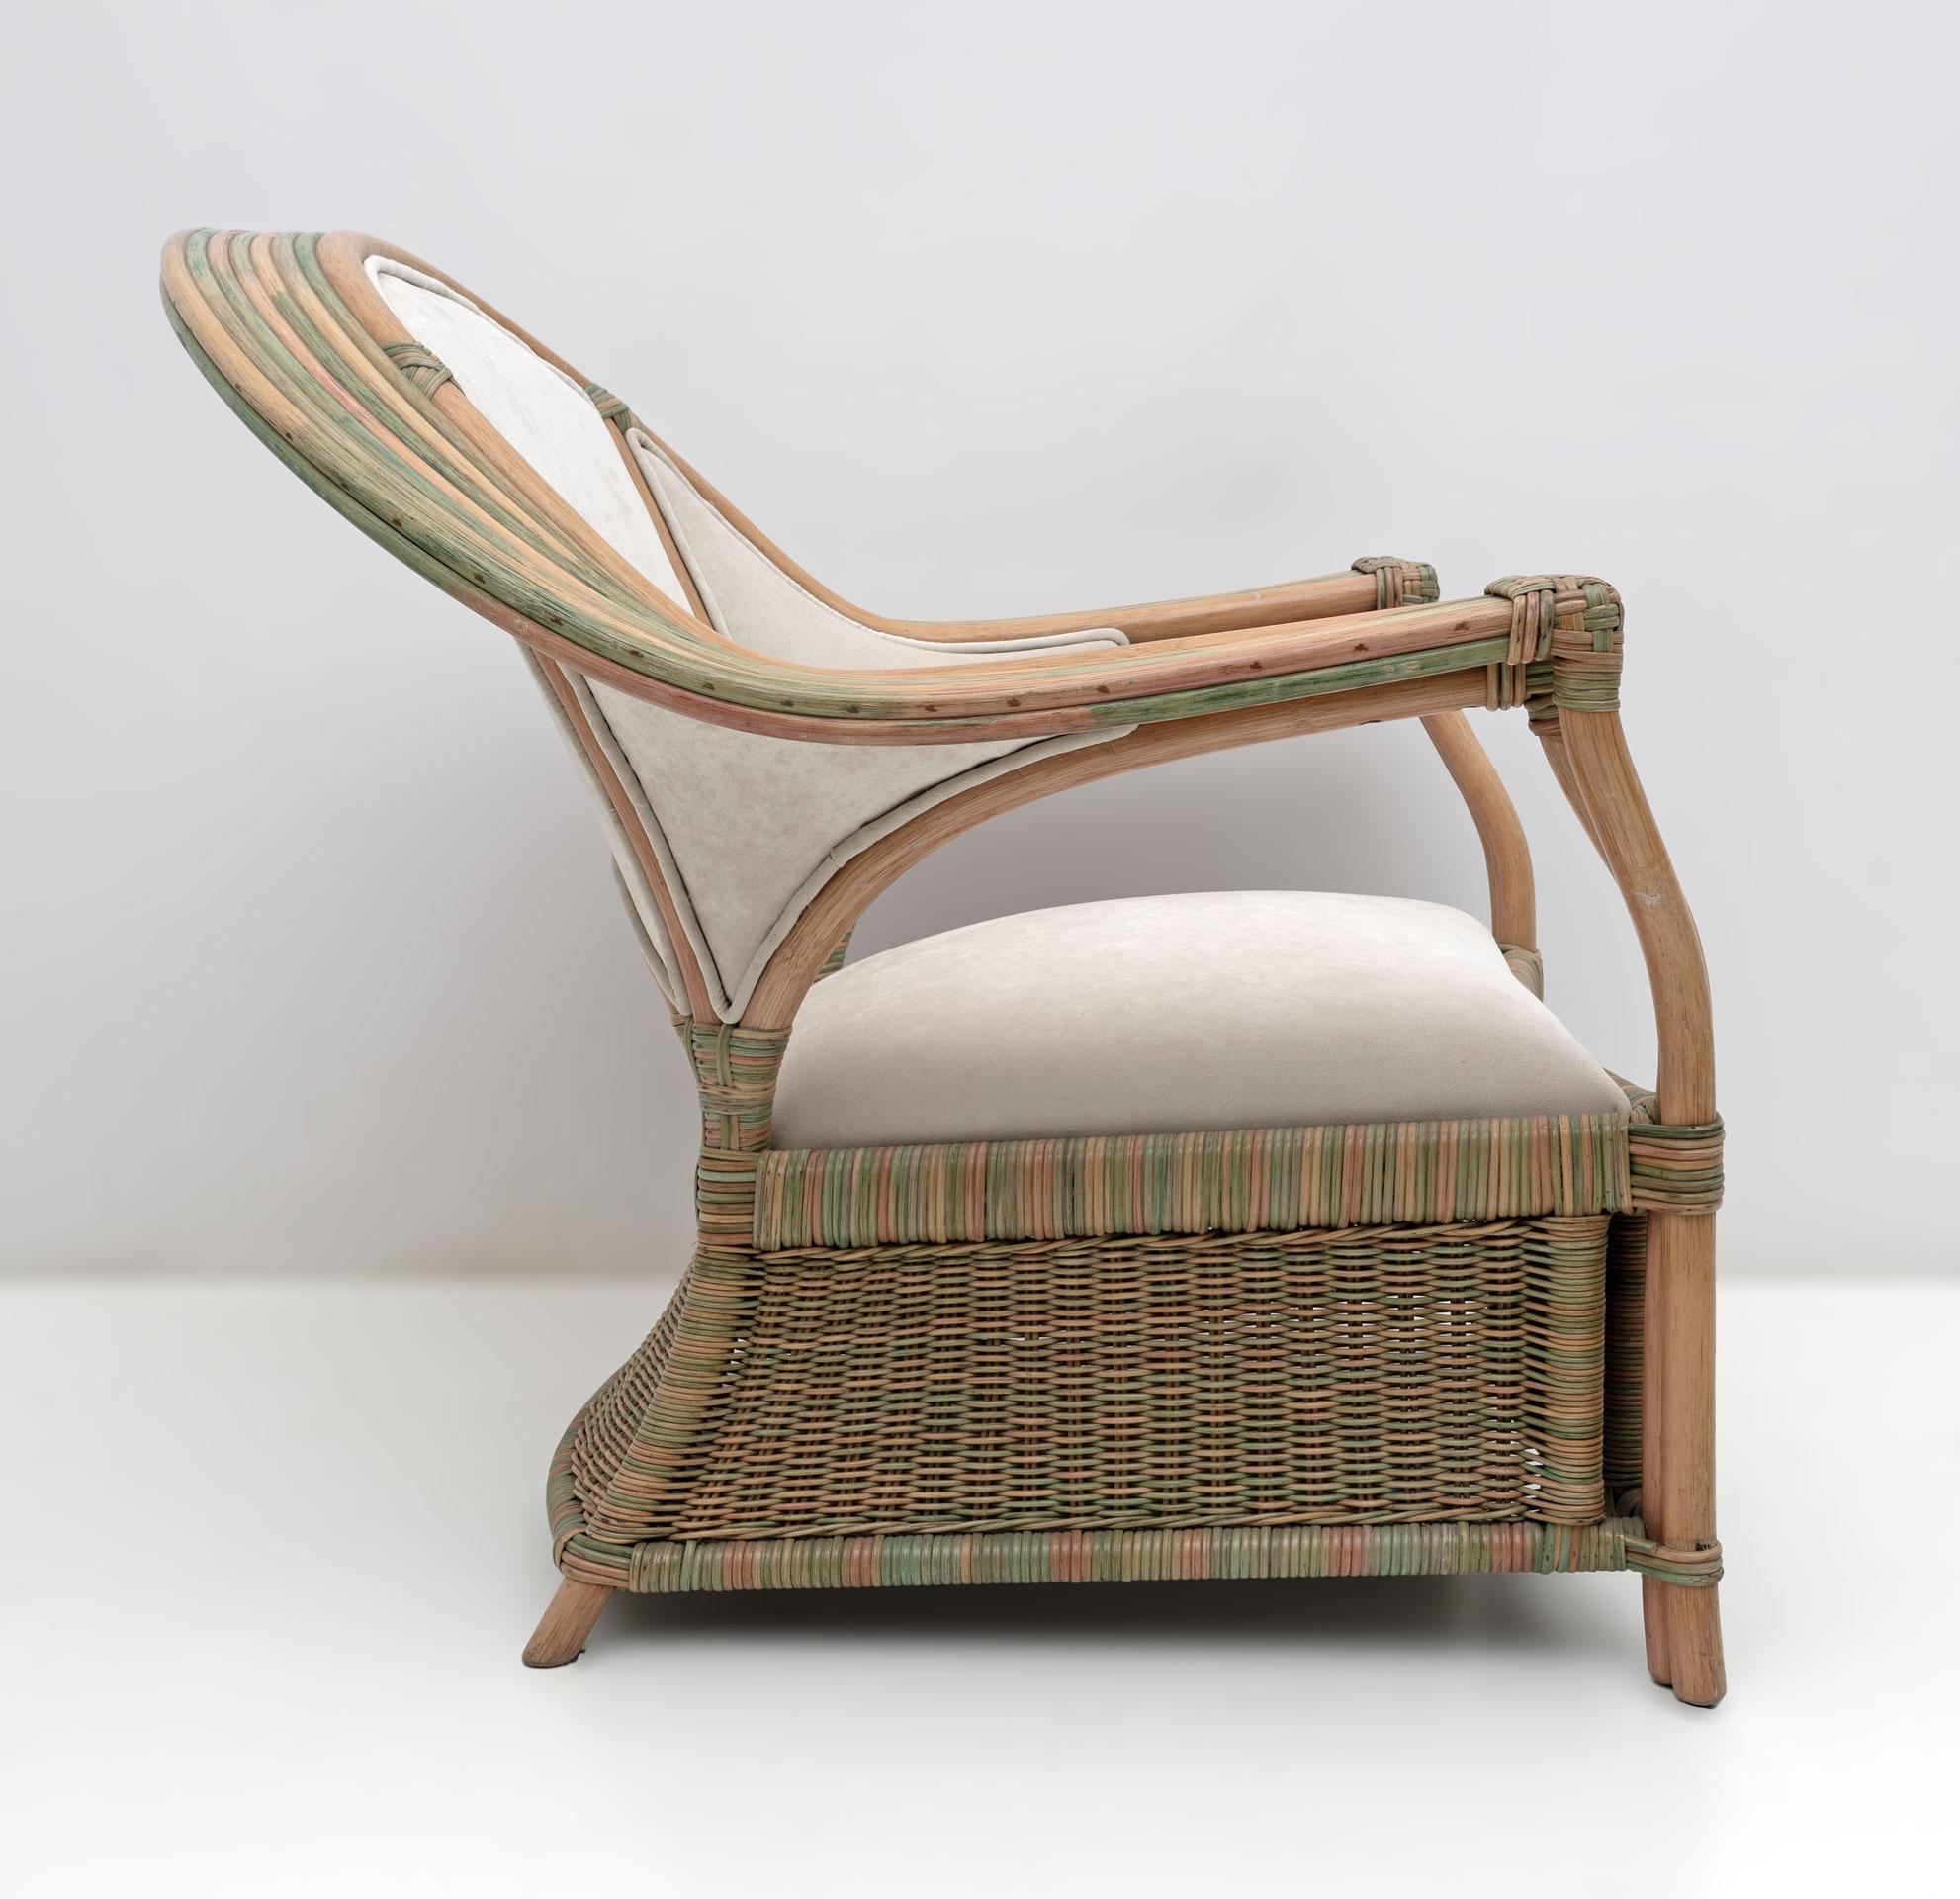 Pair of Mid-century Modern Italian Rattan and Wicker Armchairs, 1970s For Sale 4